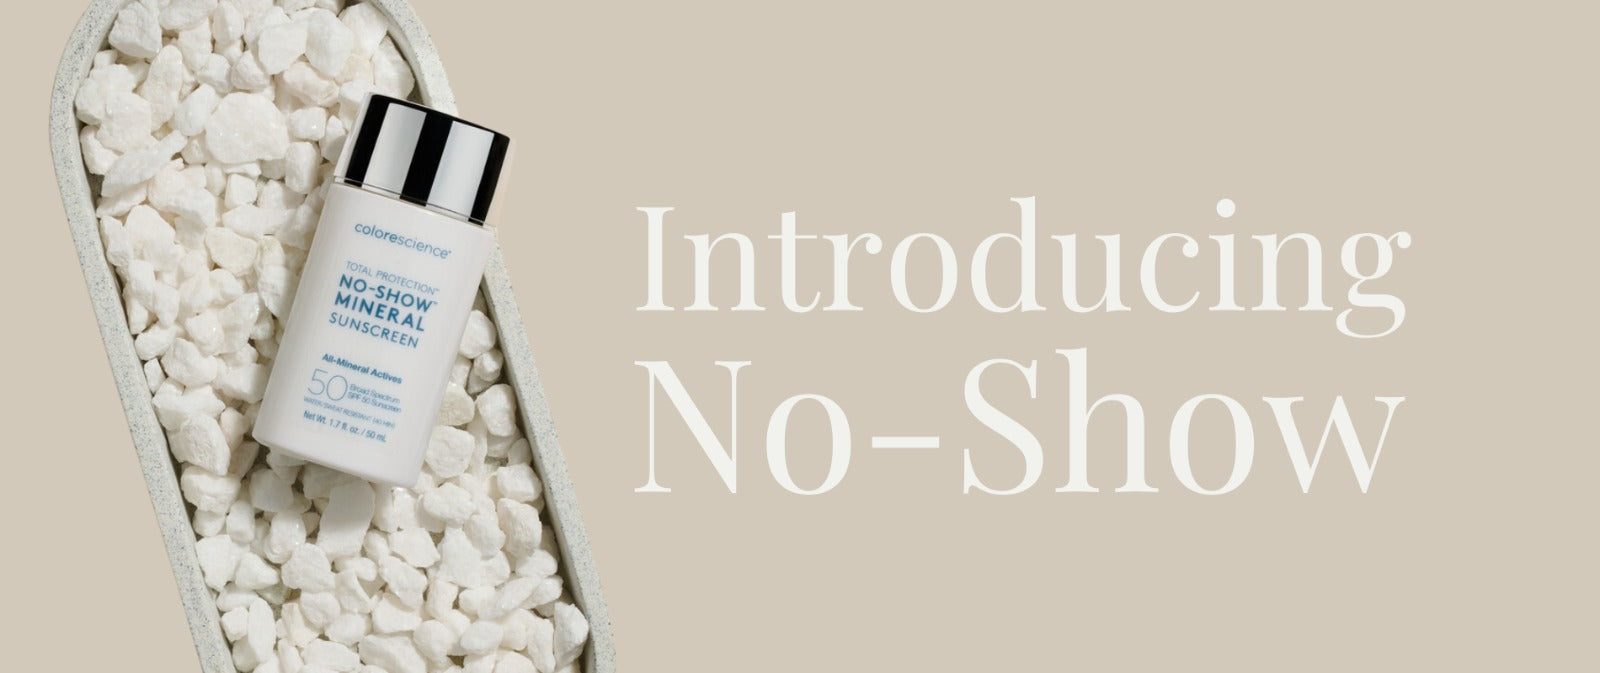 Introducing No-Show - white stones - Mineral SUNSCREEN 